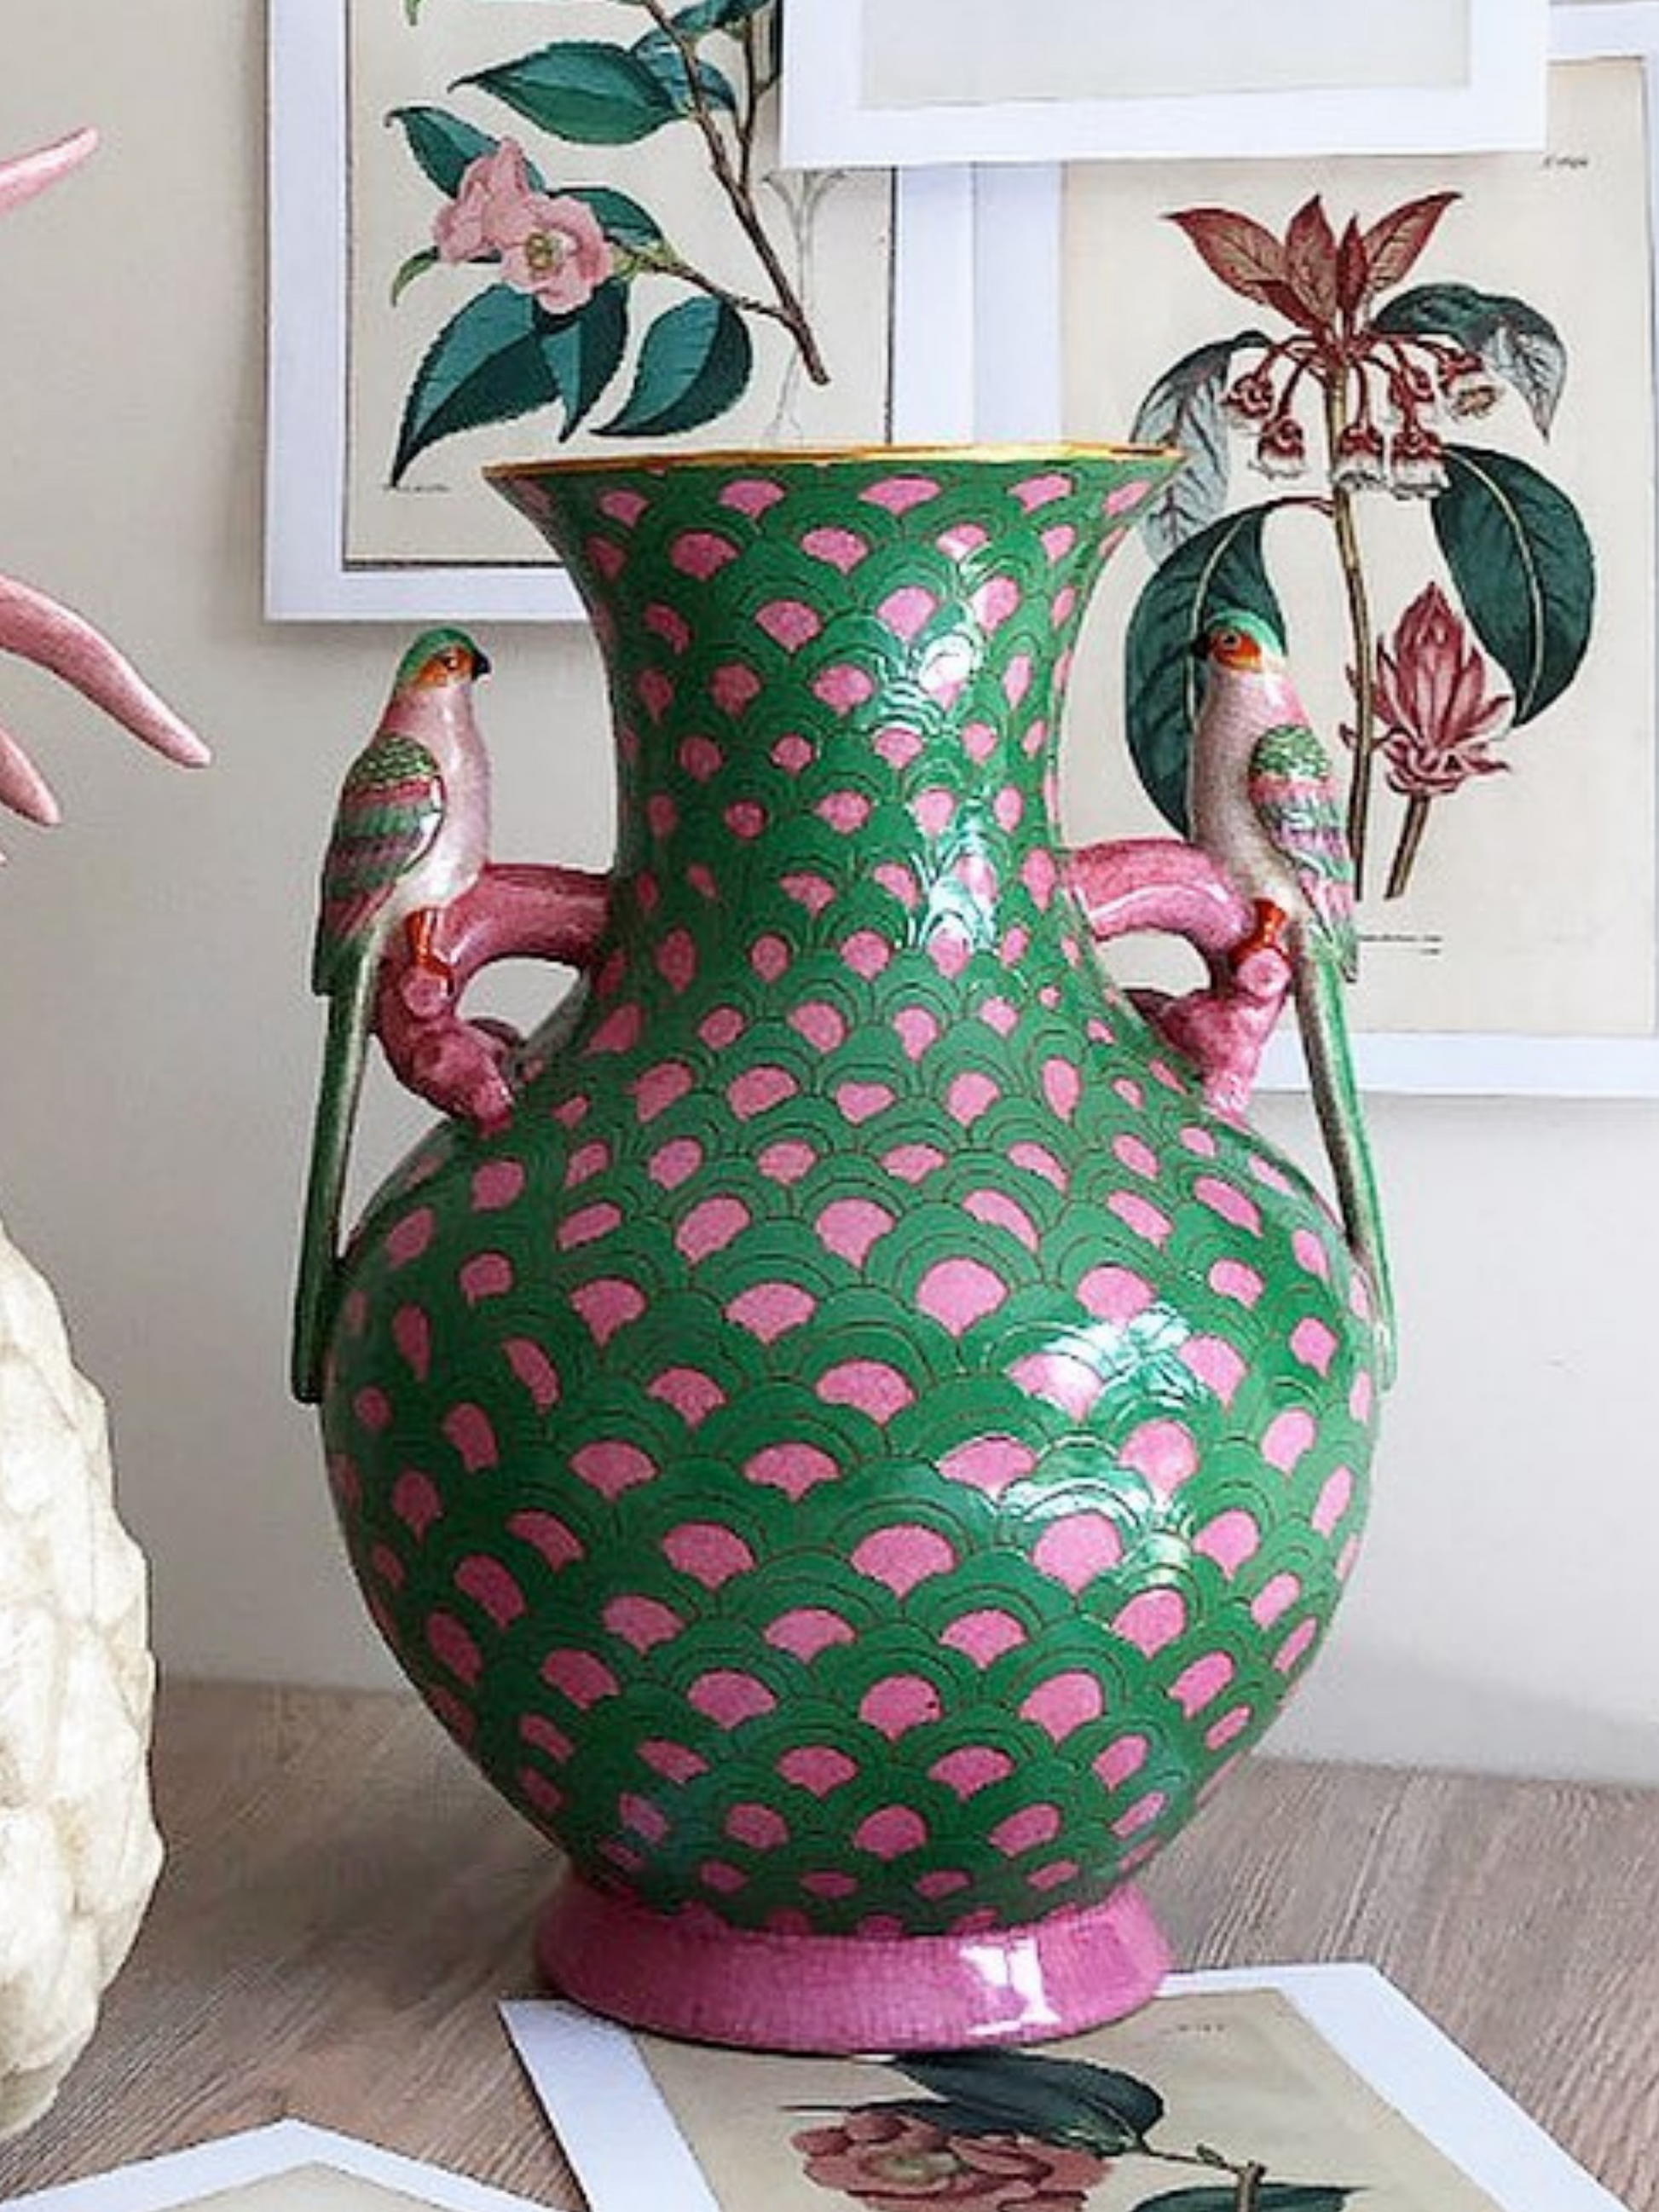 Scale Pink and Green Print Bird Sculpture Porcelain Vase by C.A.M